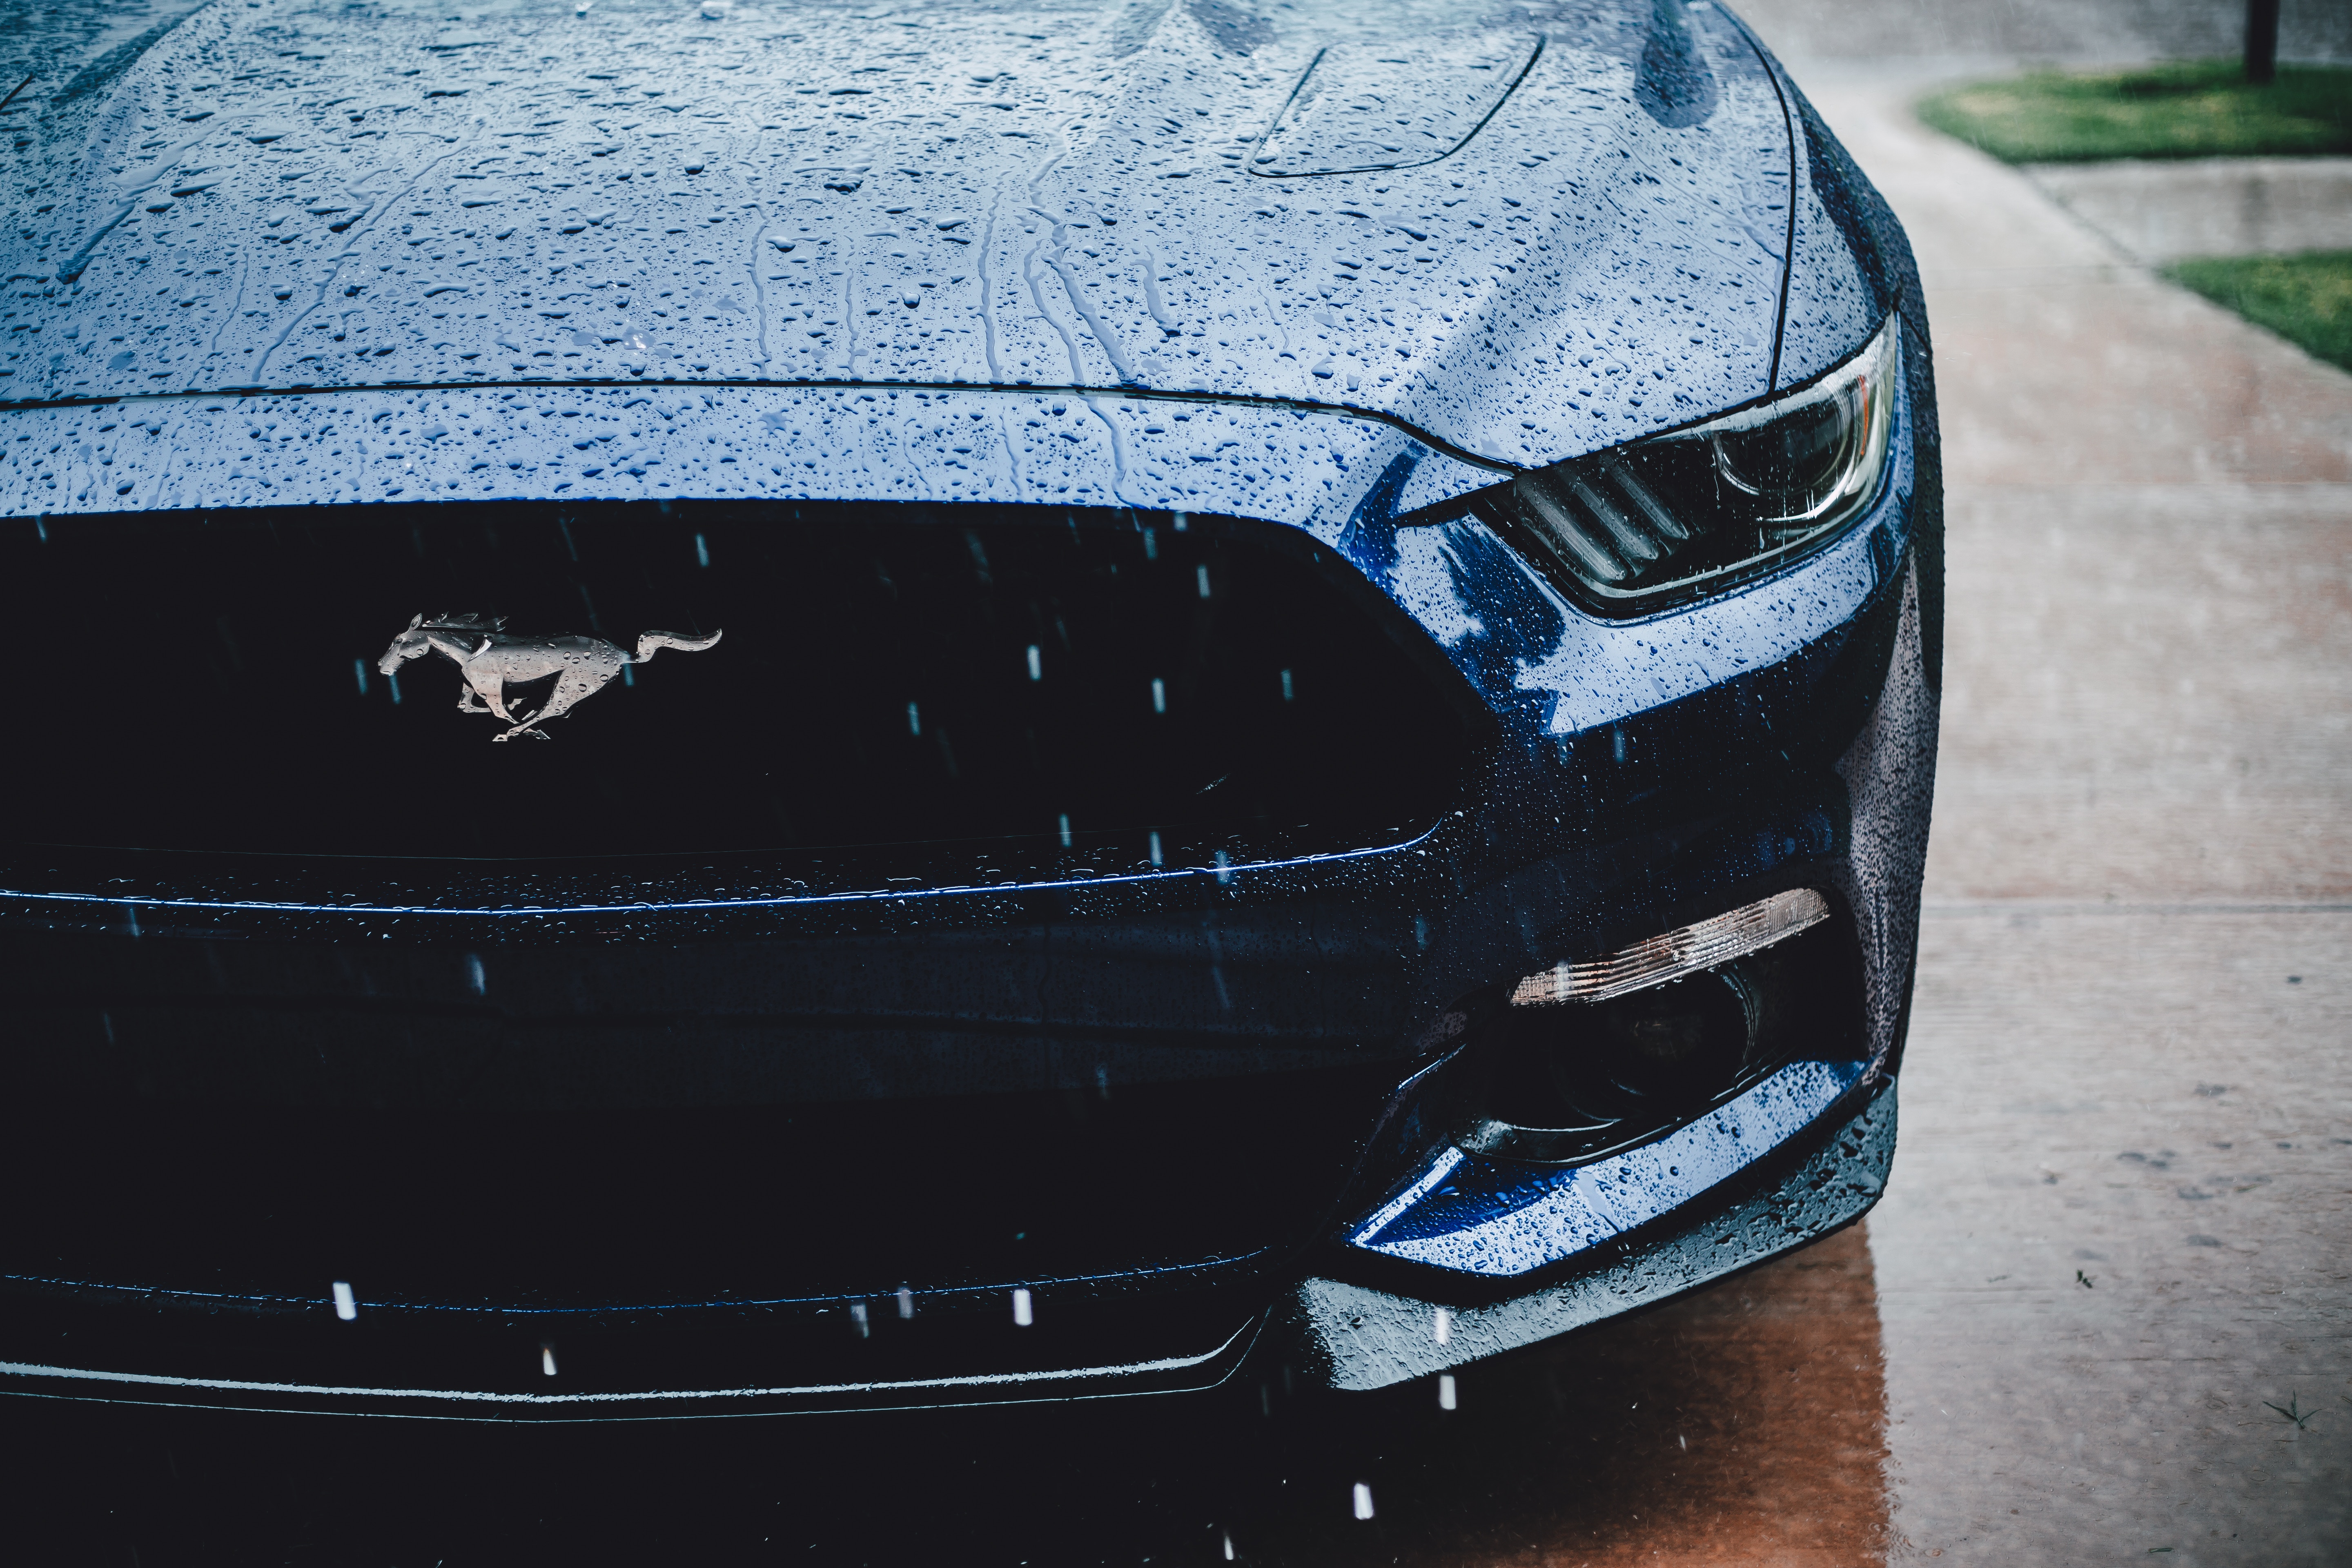 ford mustang, rain, cars, front view, headlight